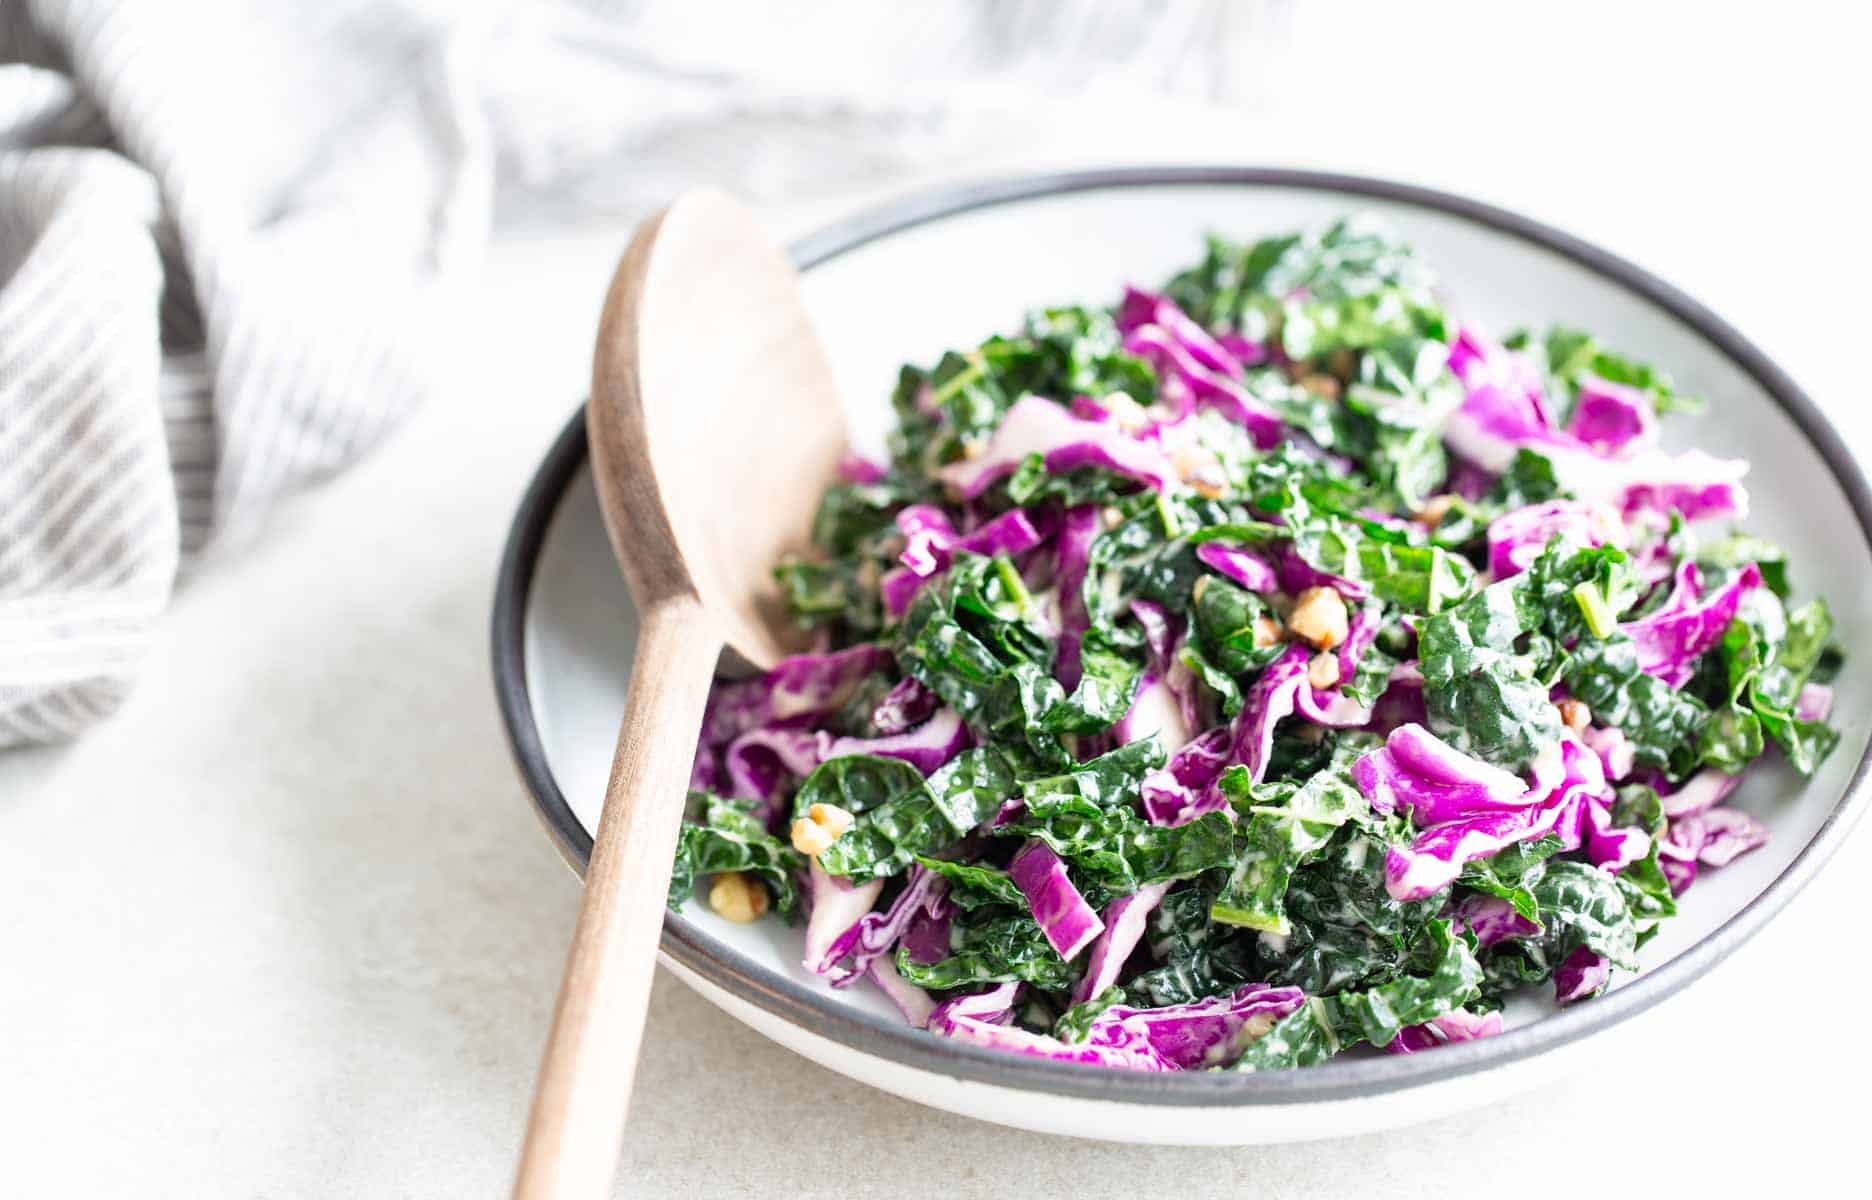 Kale slaw in a bowl with a wooden spoon.